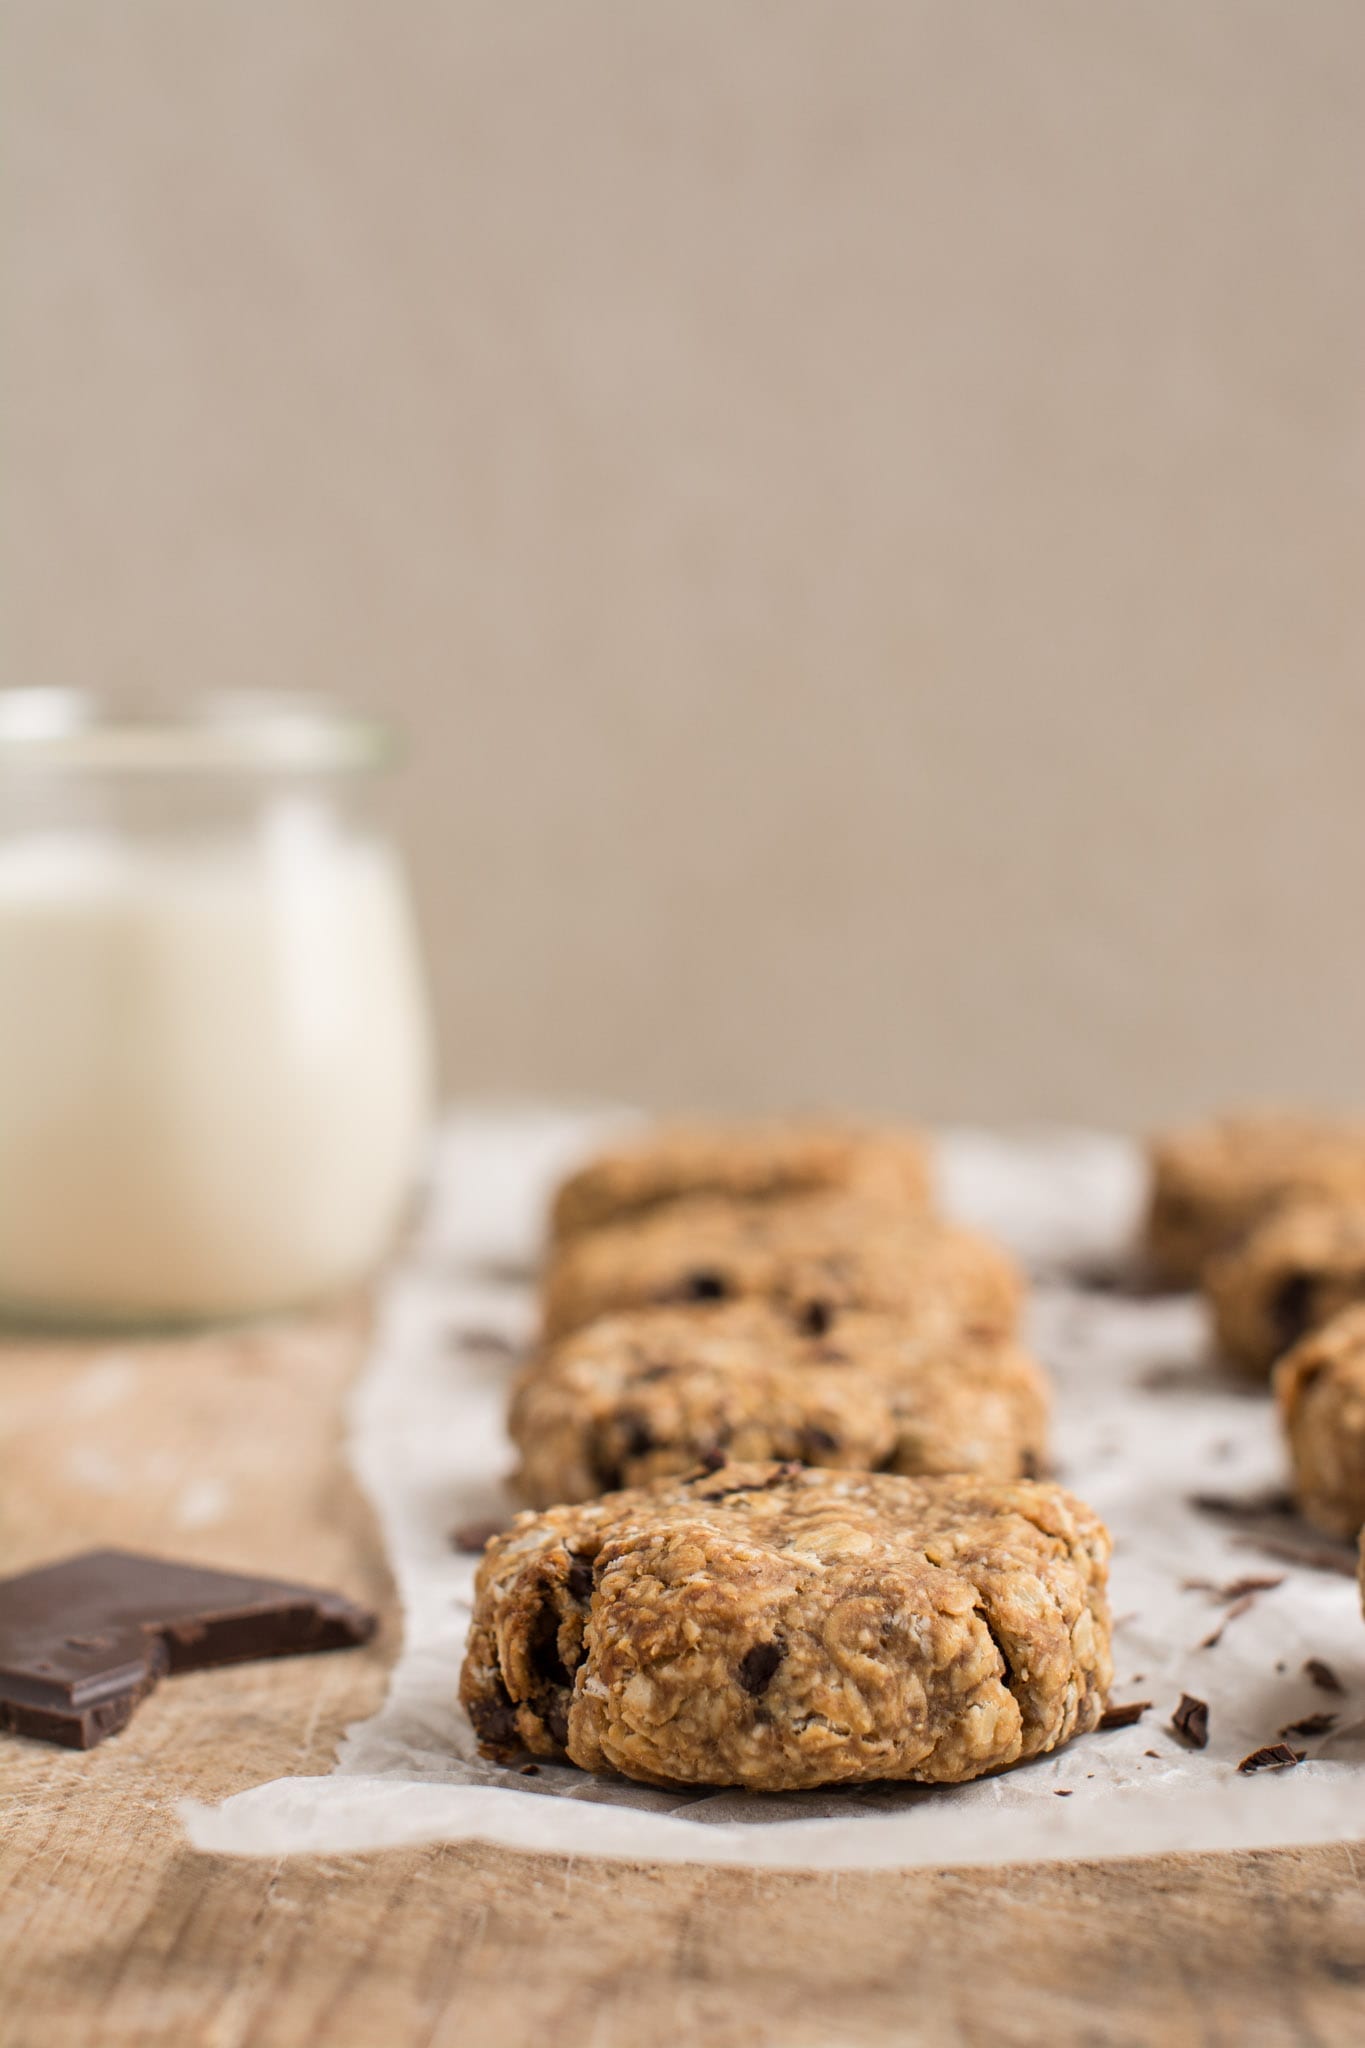 Super easy and delicious vegan oatmeal cookies that are soft and chewy using whole food plant-based ingredients. 